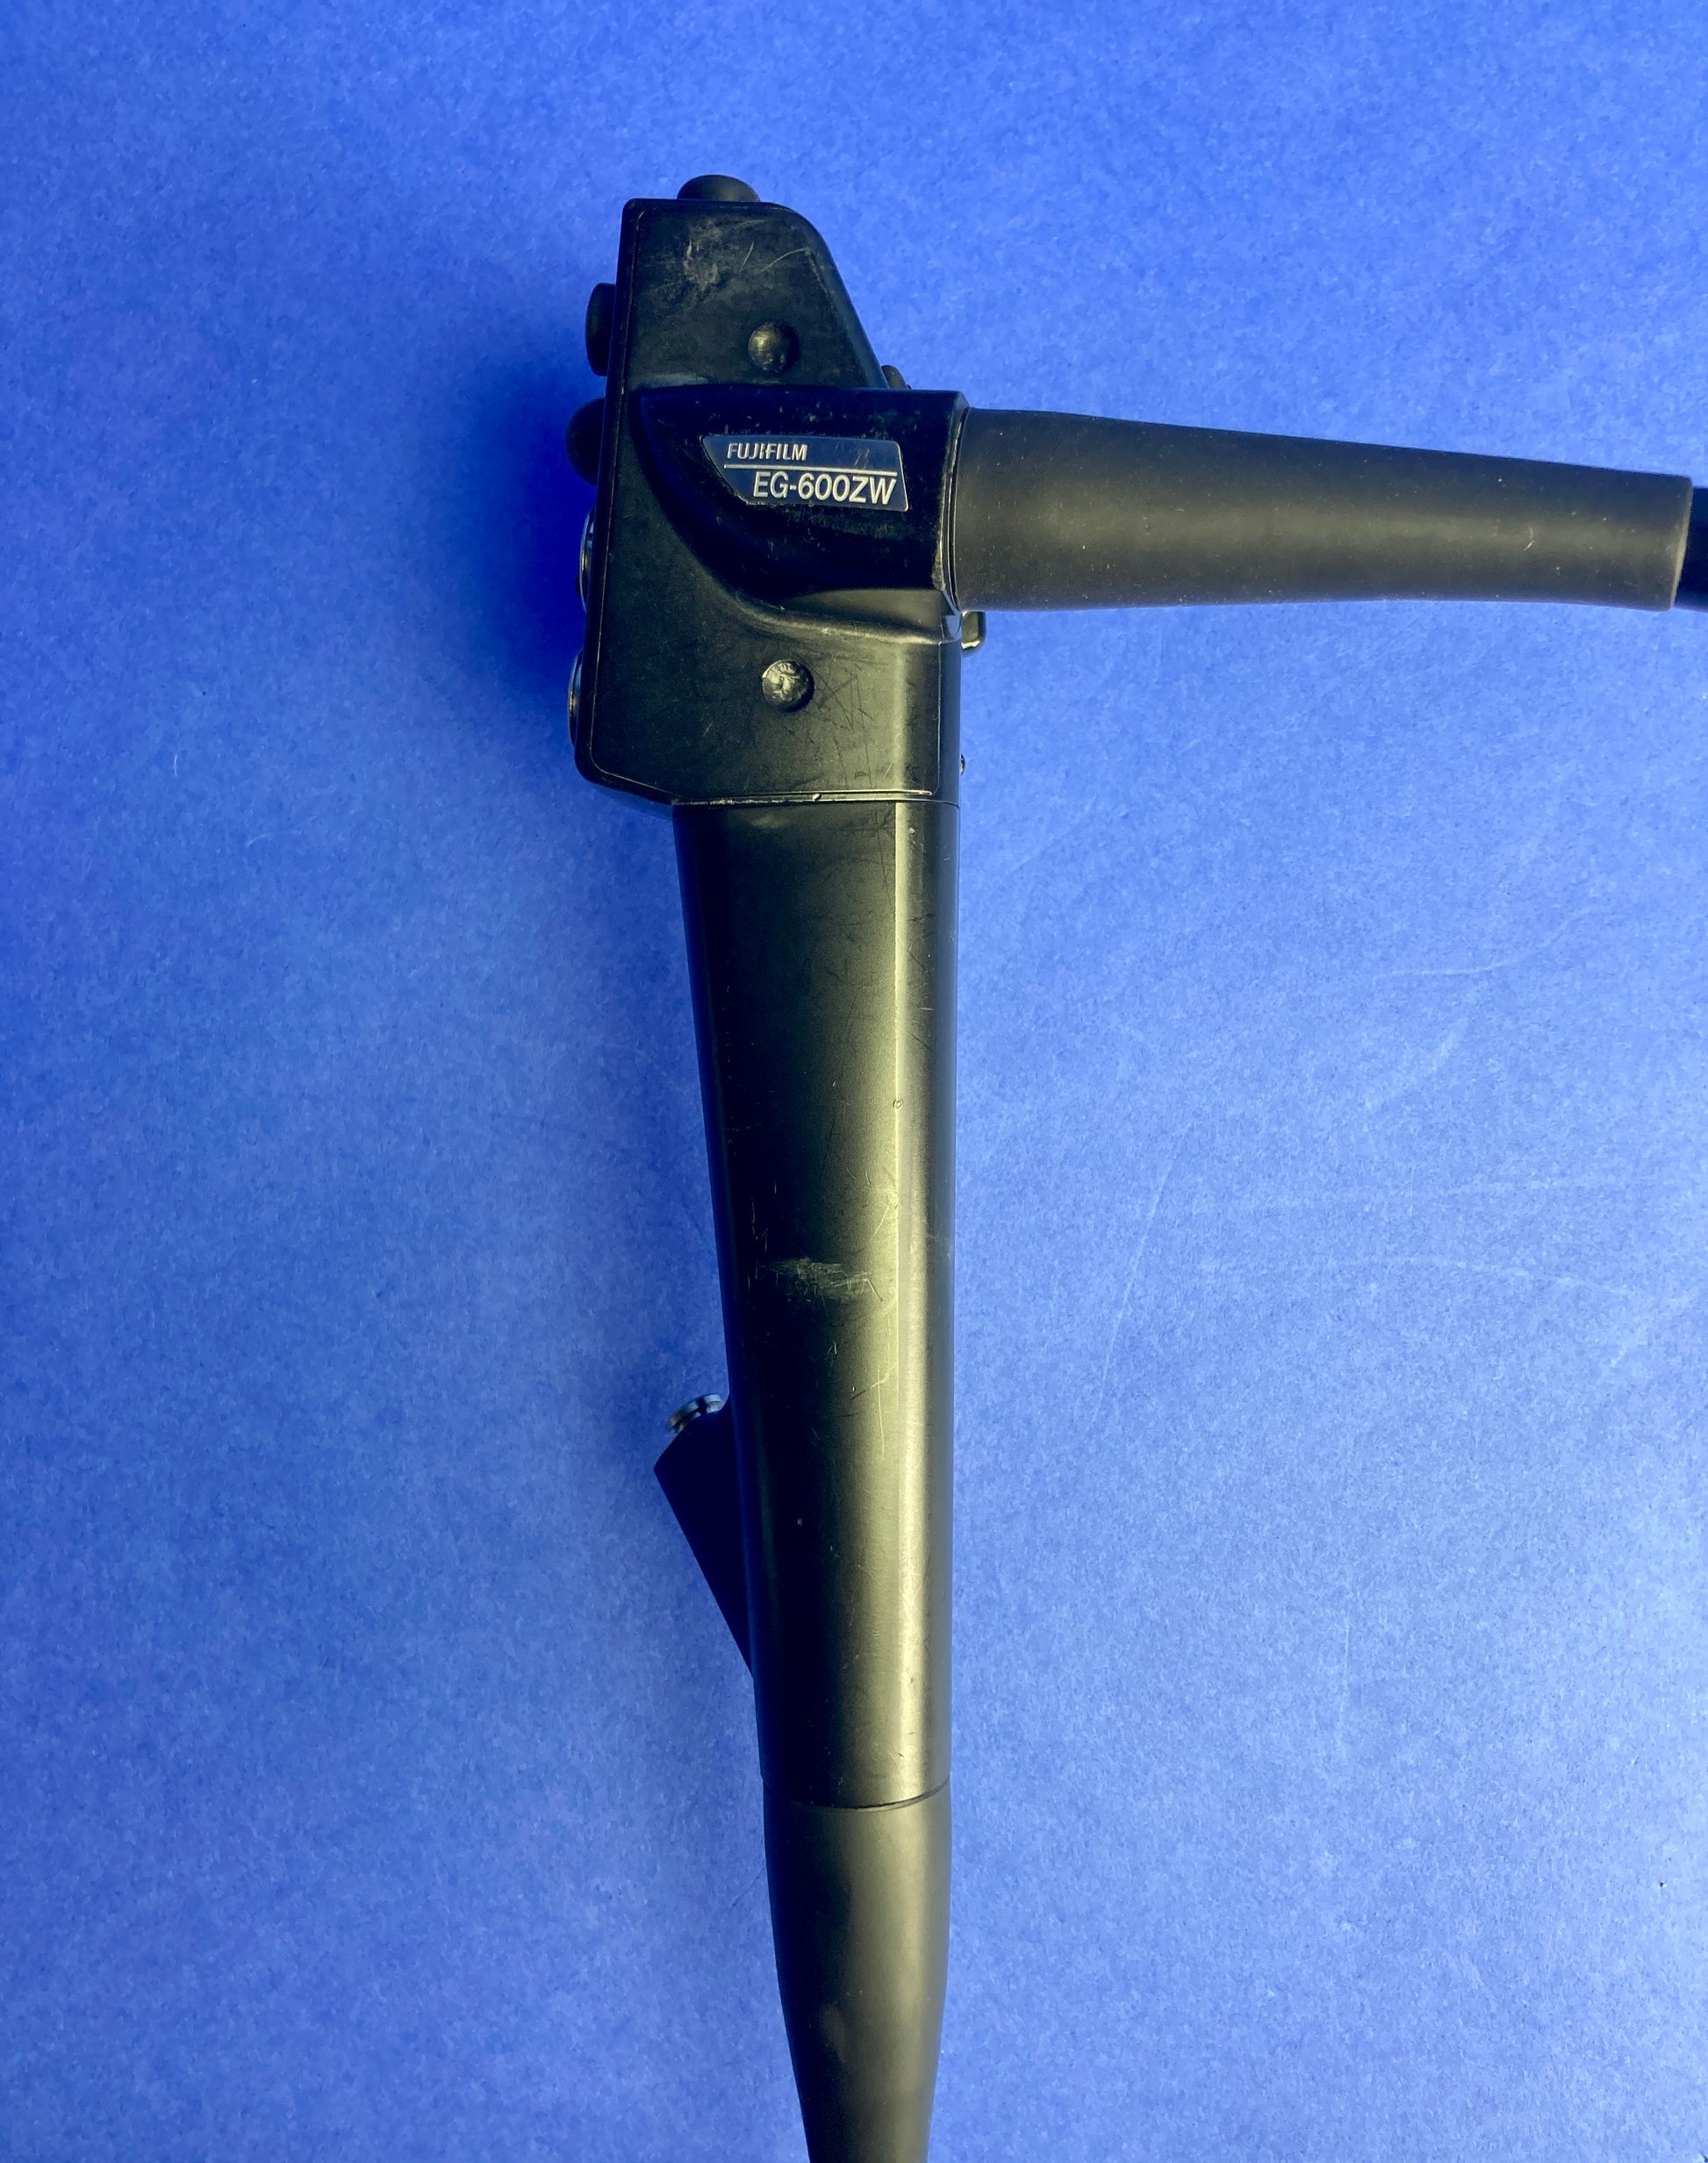 Endoscope with its brand and model number 